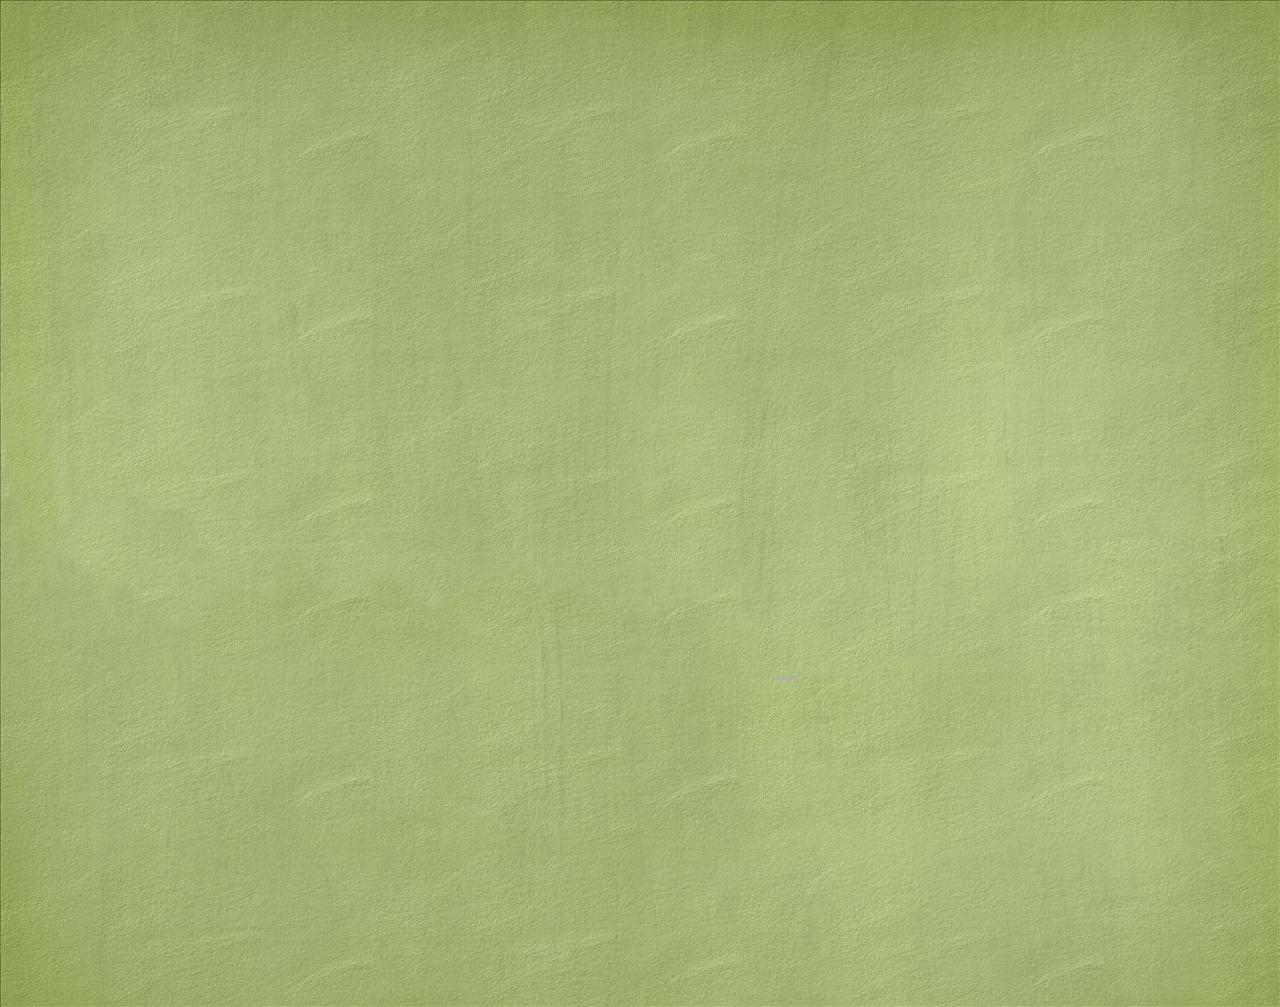 Textured Green Backgrounds